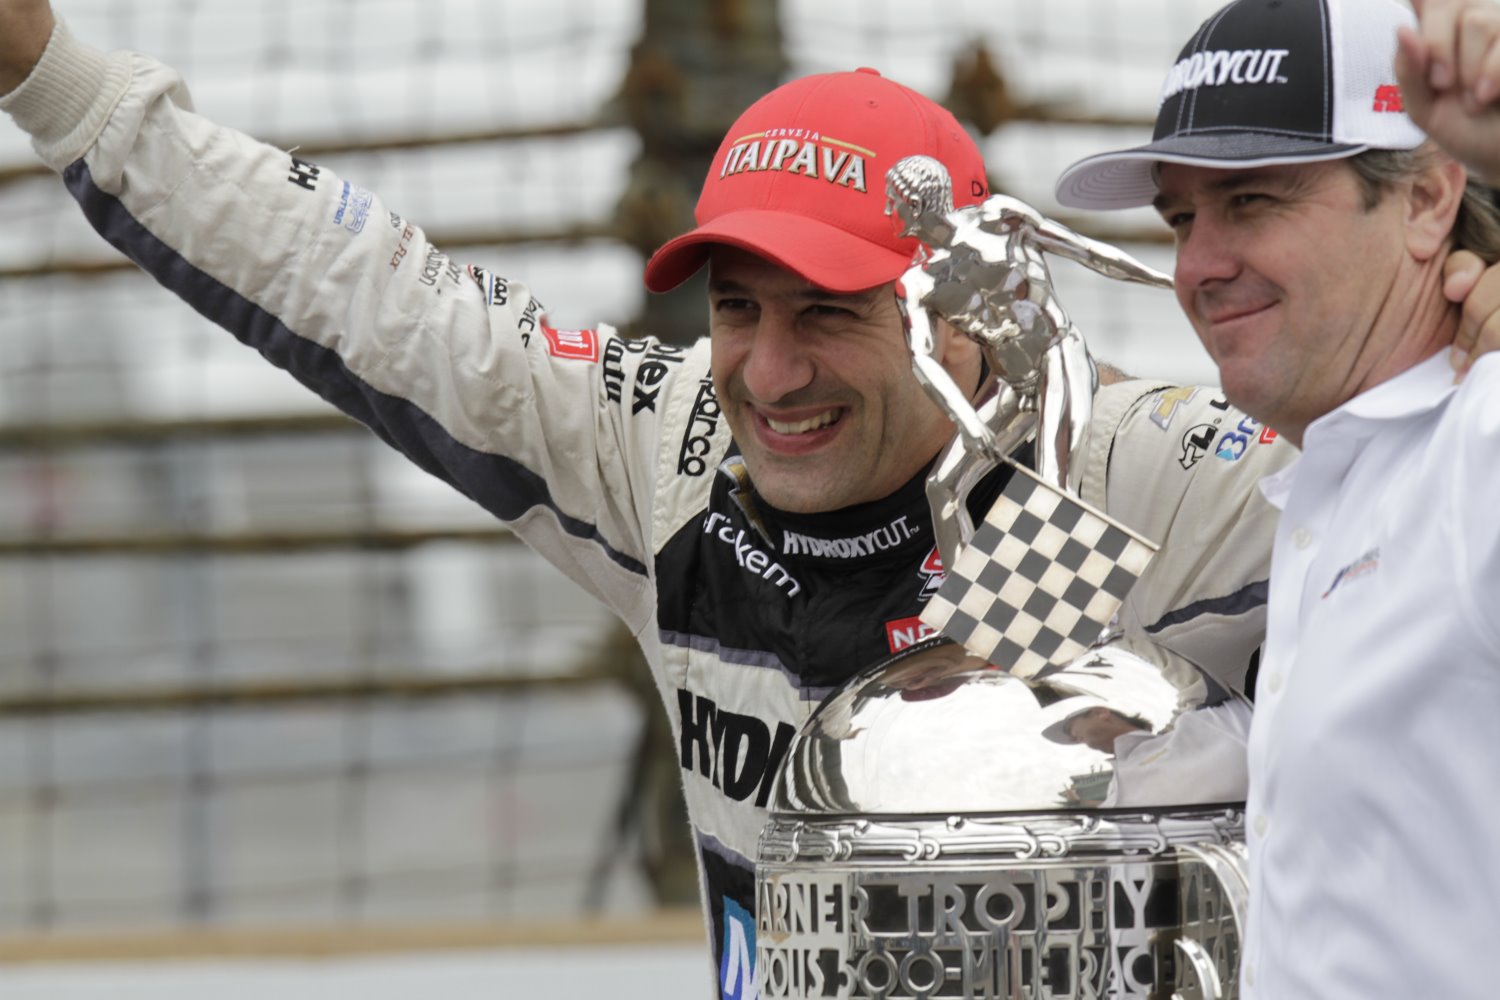 Tony Kanaan and Jimmy Vasser after winning the 2013 Indy 500. Now the team is gone.